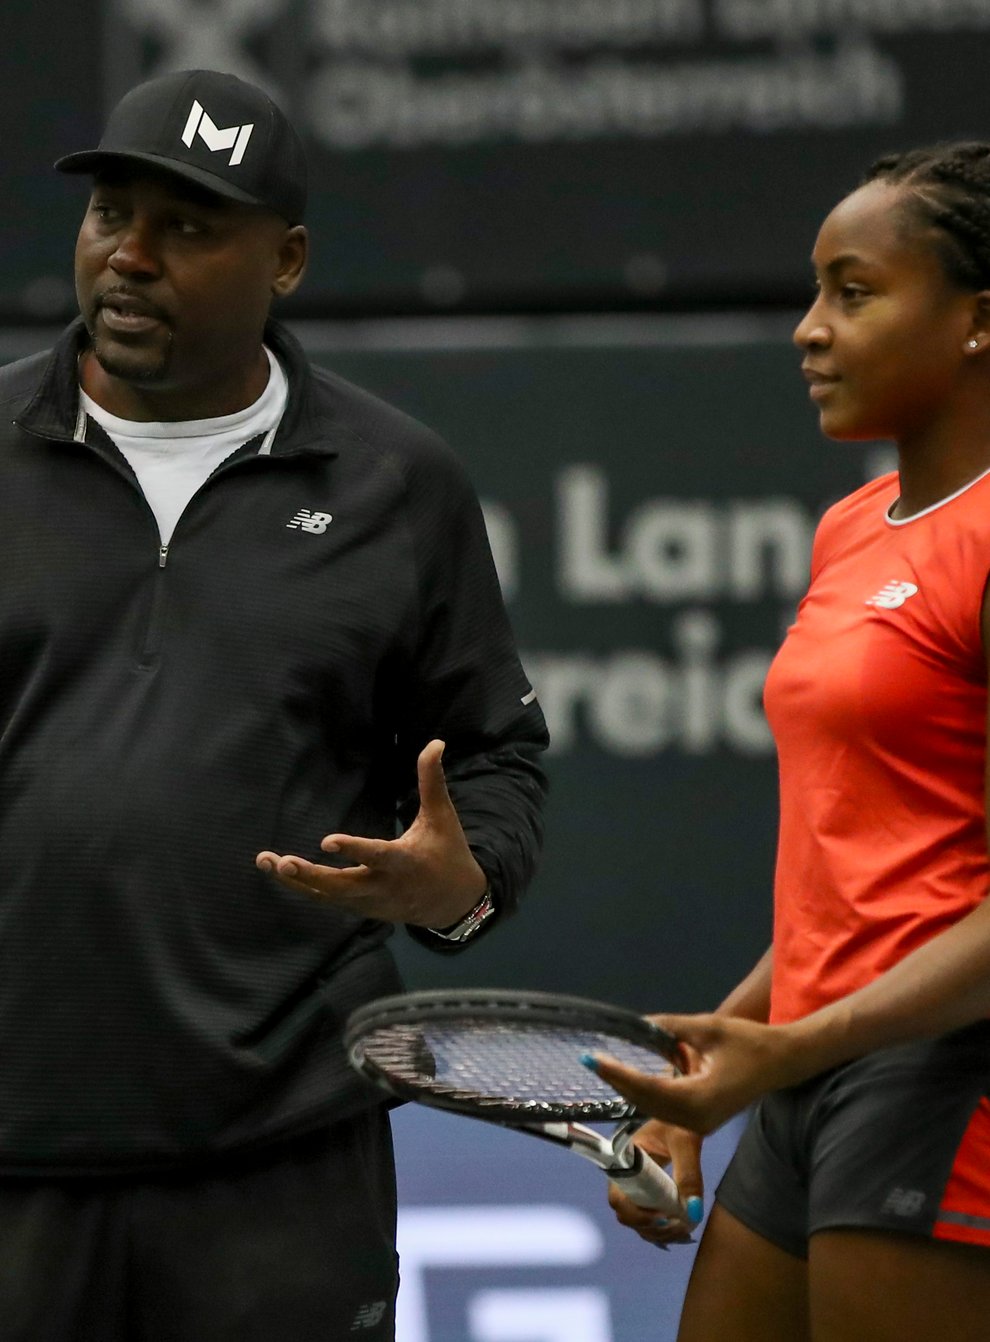 Corey Gauff oversees daughter Coco in a training session (PA Images)